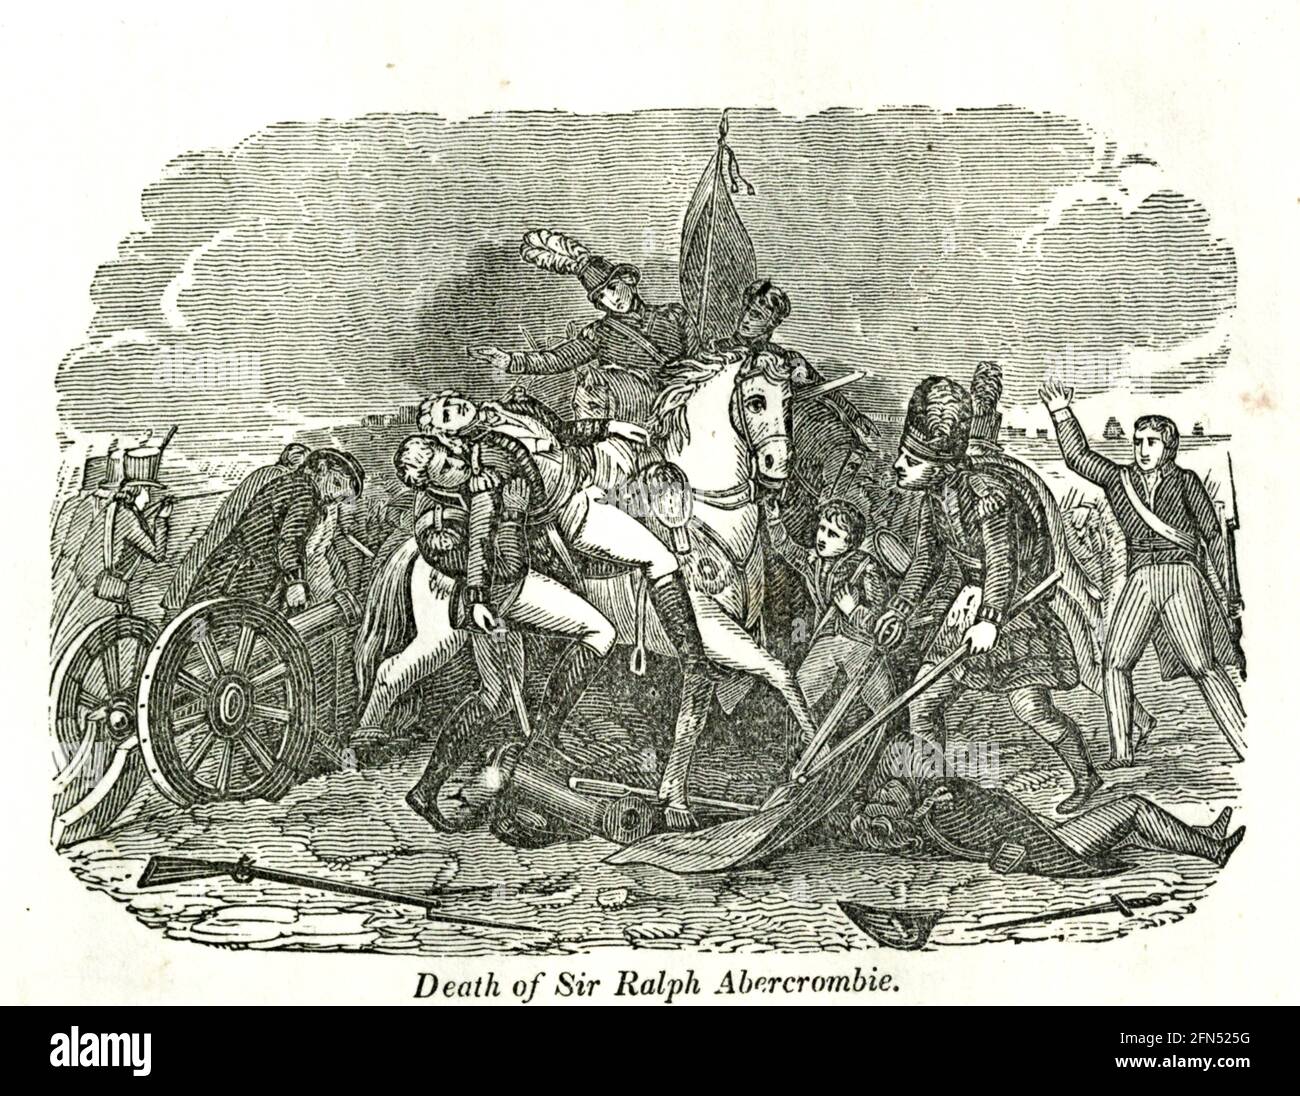 Death of Sir Ralph Abercrombie [Sir Ralph Abercromby KB (sometimes spelt Abercrombie) (7 October 1734 – 28 March 1801) was a Scottish soldier and politician. He twice served as MP for Clackmannanshire, rose to the rank of lieutenant-general in the British Army, was appointed Governor of Trinidad, served as Commander-in-Chief, Ireland, and was noted for his services during the French Revolutionary Wars]. from the book History of England : with separate historical sketches of Scotland, Wales, and Ireland; from the invasion of Julius Cæsar until the accession of Queen Victoria to the British thro Stock Photo